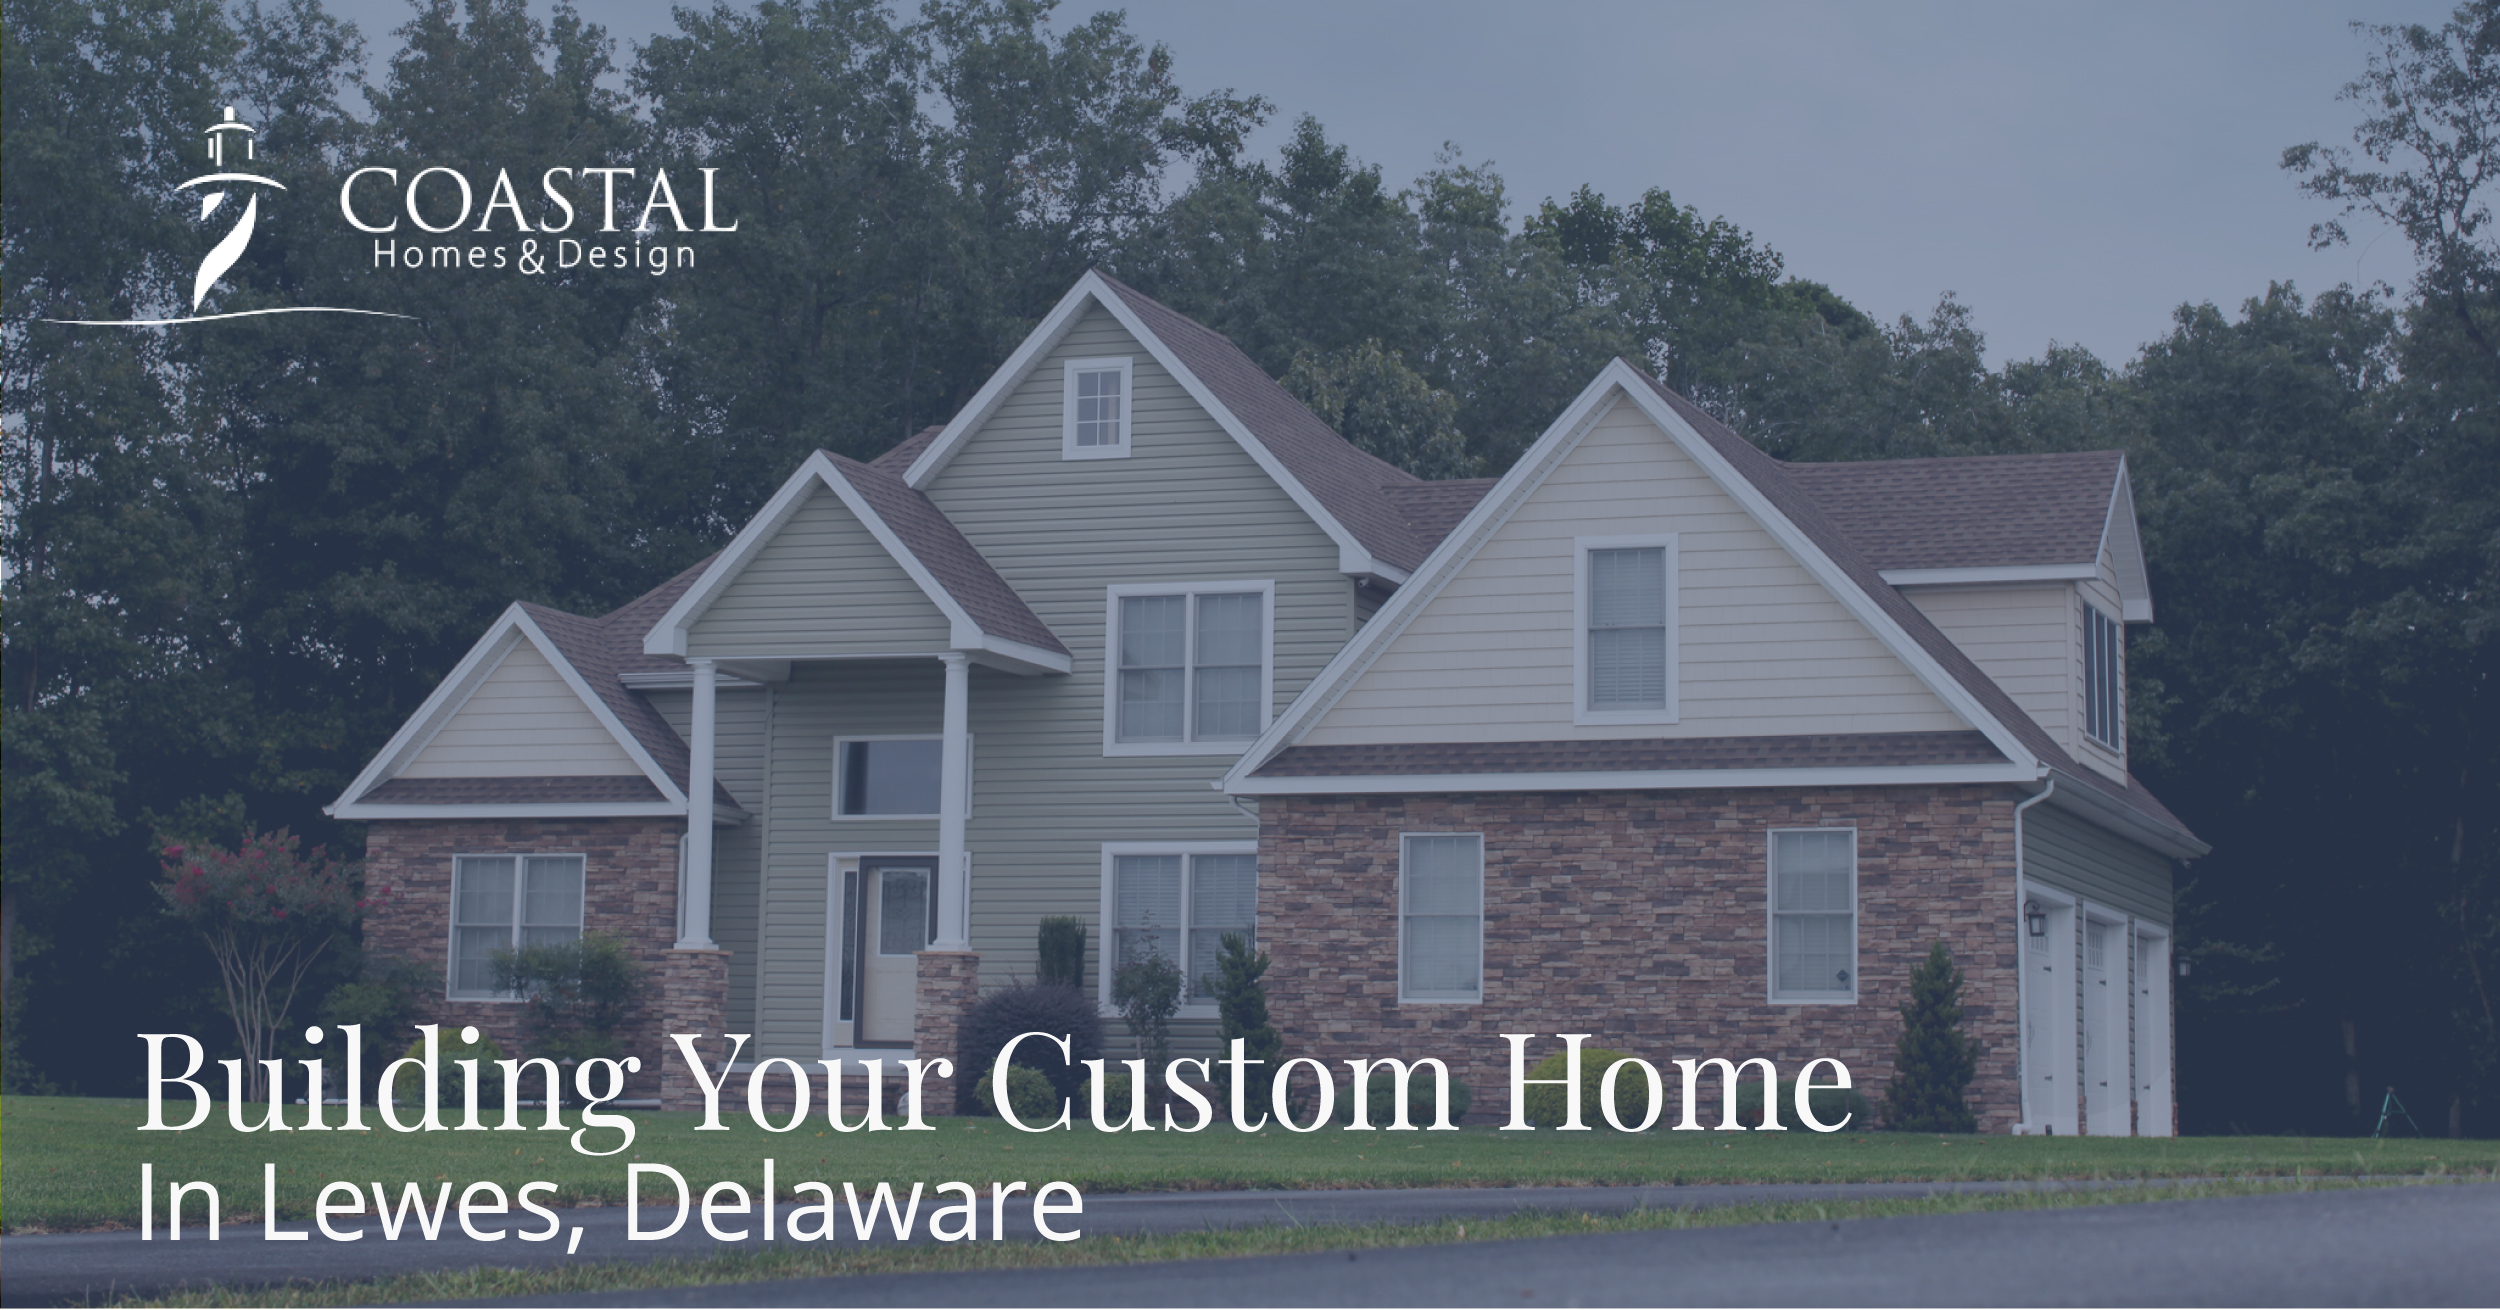 New Home Construction in Lower Delaware